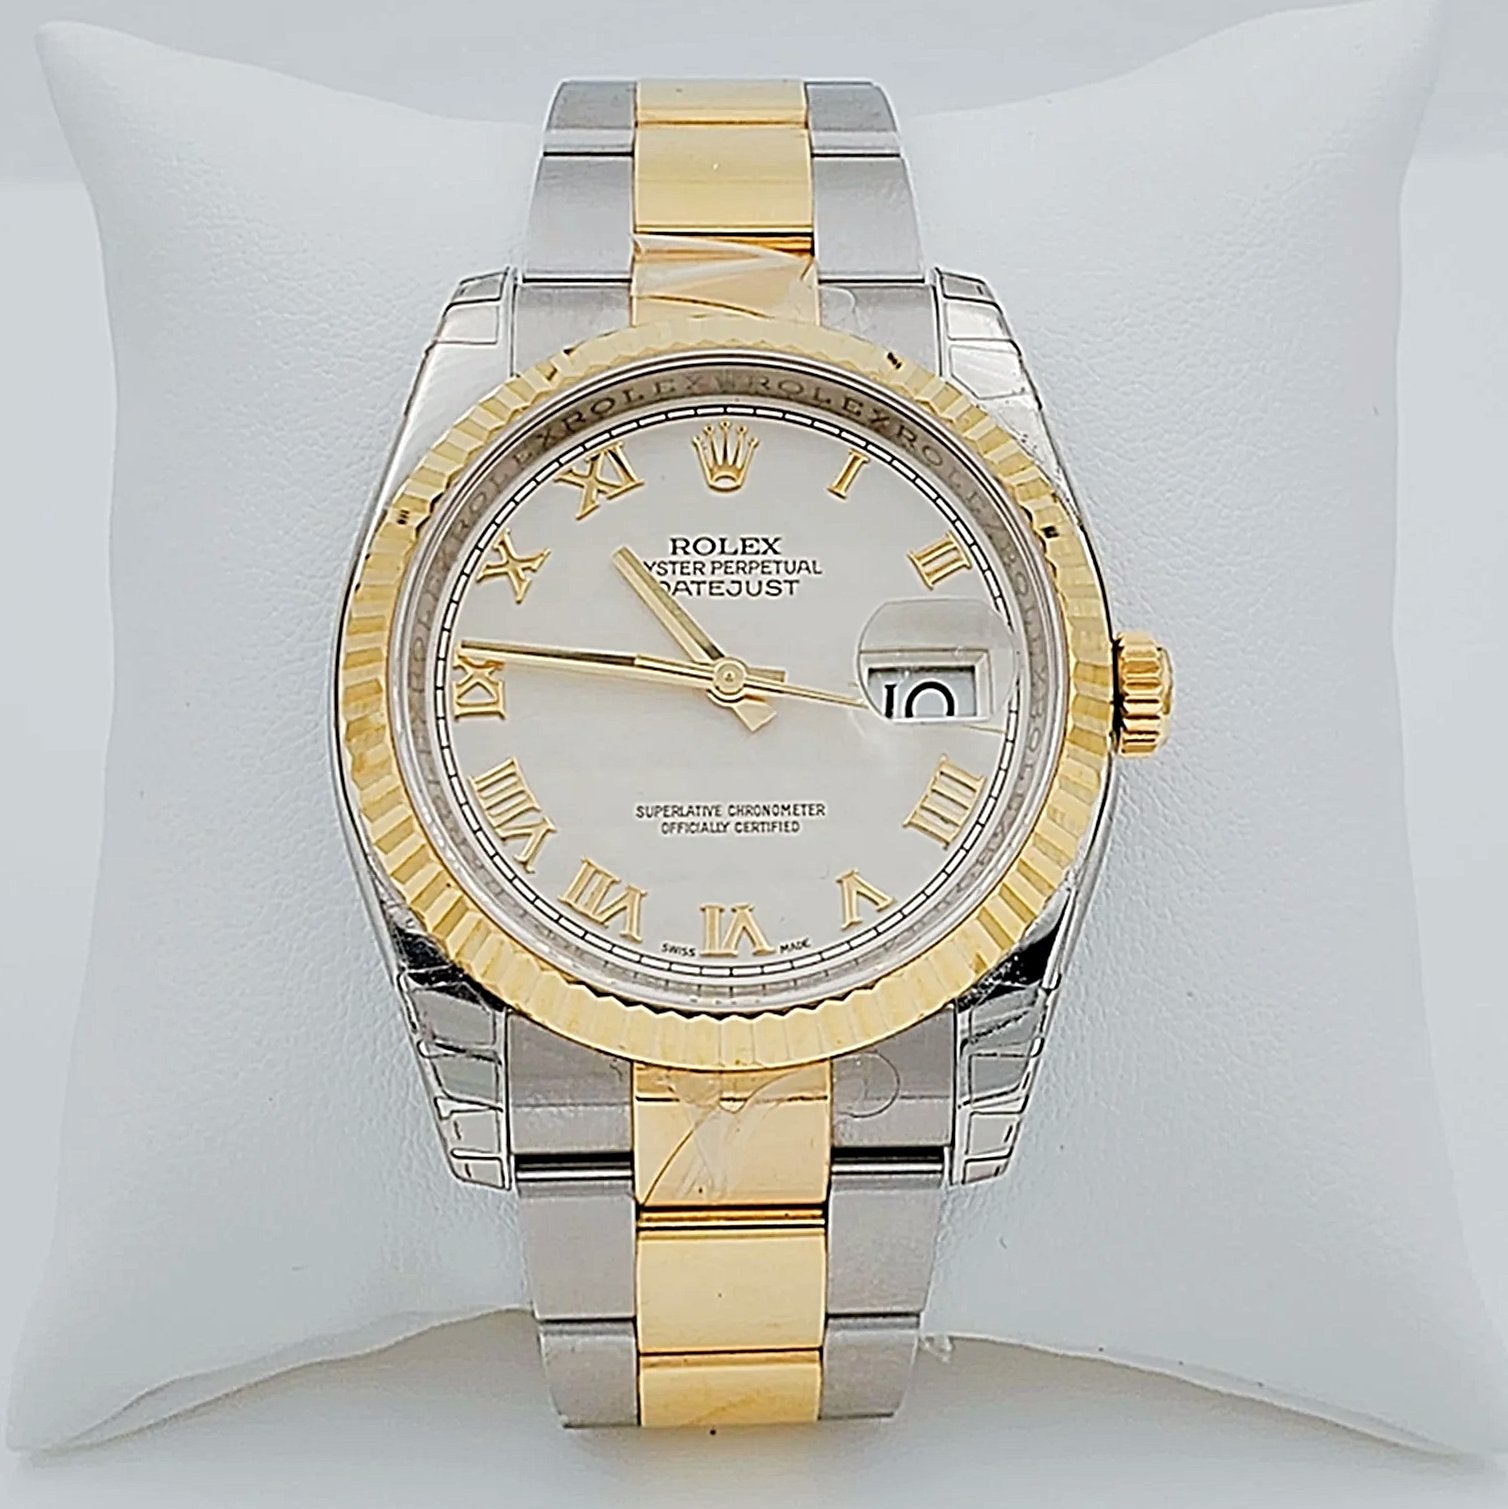 *Men's Rolex DateJust 36mm Oyster Perpetual Two Tone 18K Gold / Stainless Steel Band Watch with Egg Shell Dial and Fluted Bezel. (UNWORN 116203)